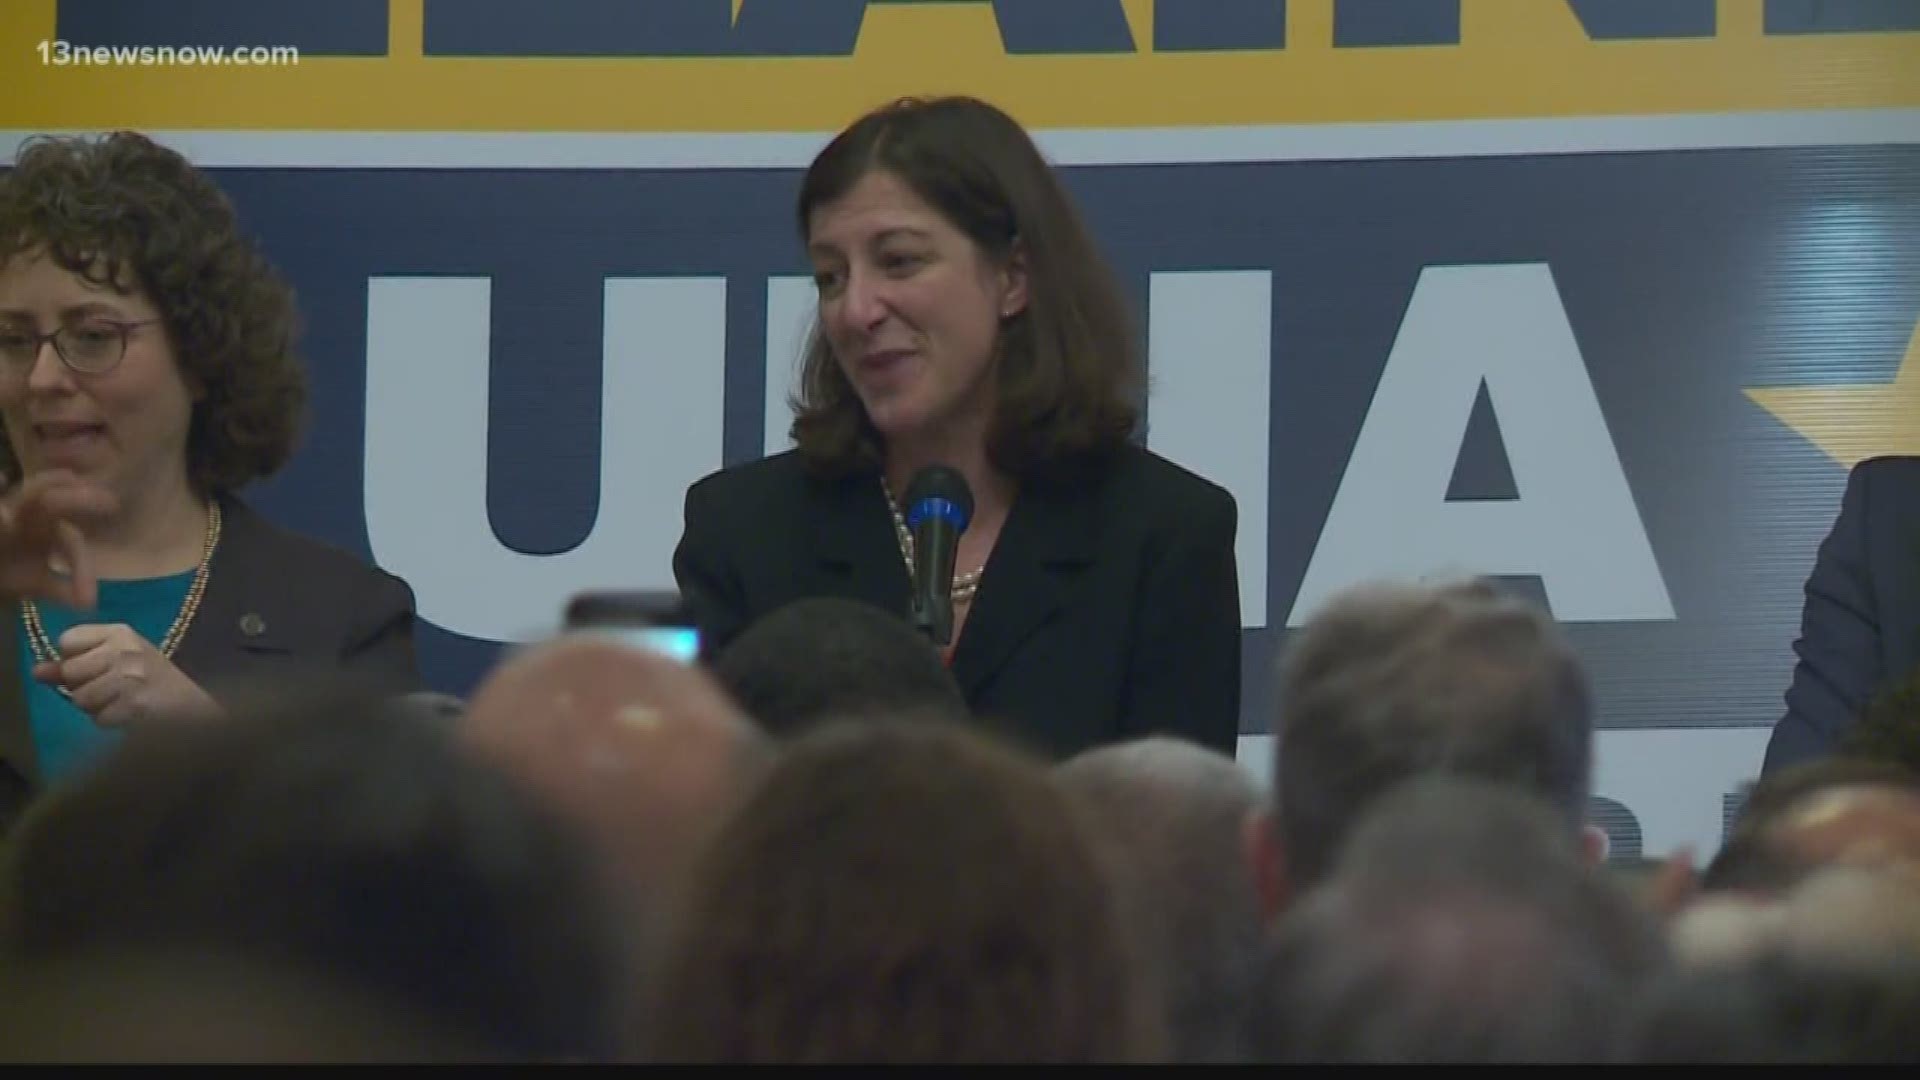 Second District Congresswoman Elaine Luria won a seat on the coveted Armed Services Committee.